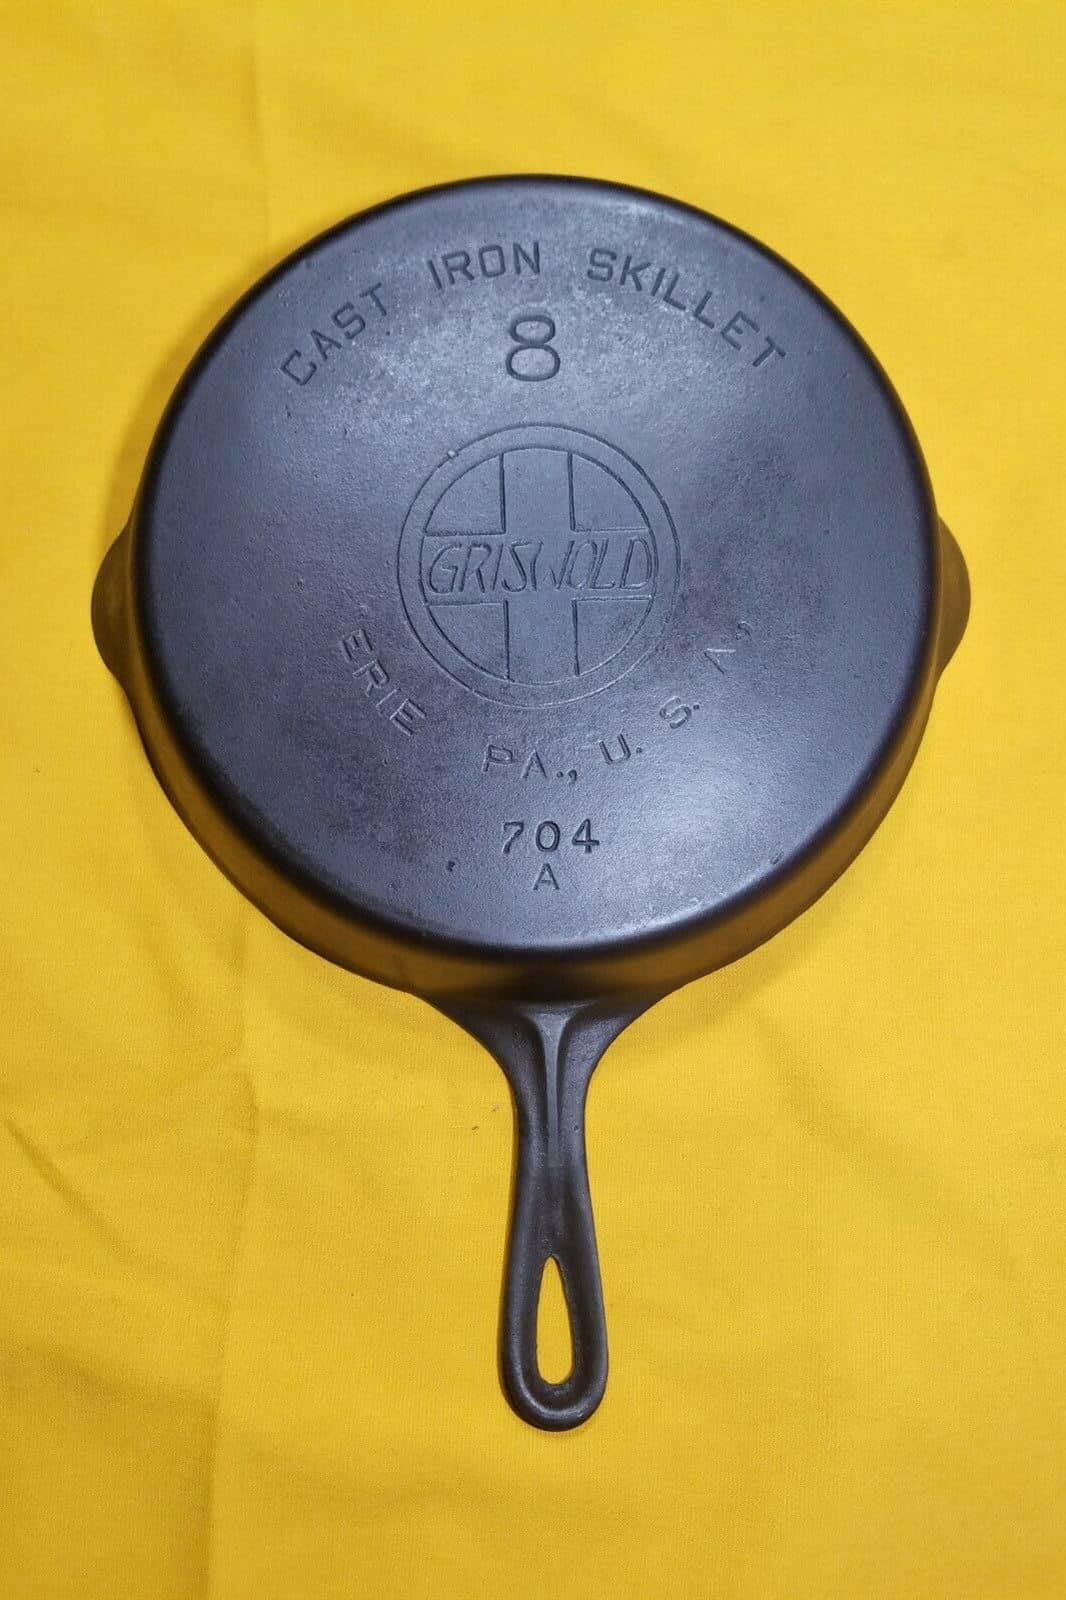 griswold iron skillet